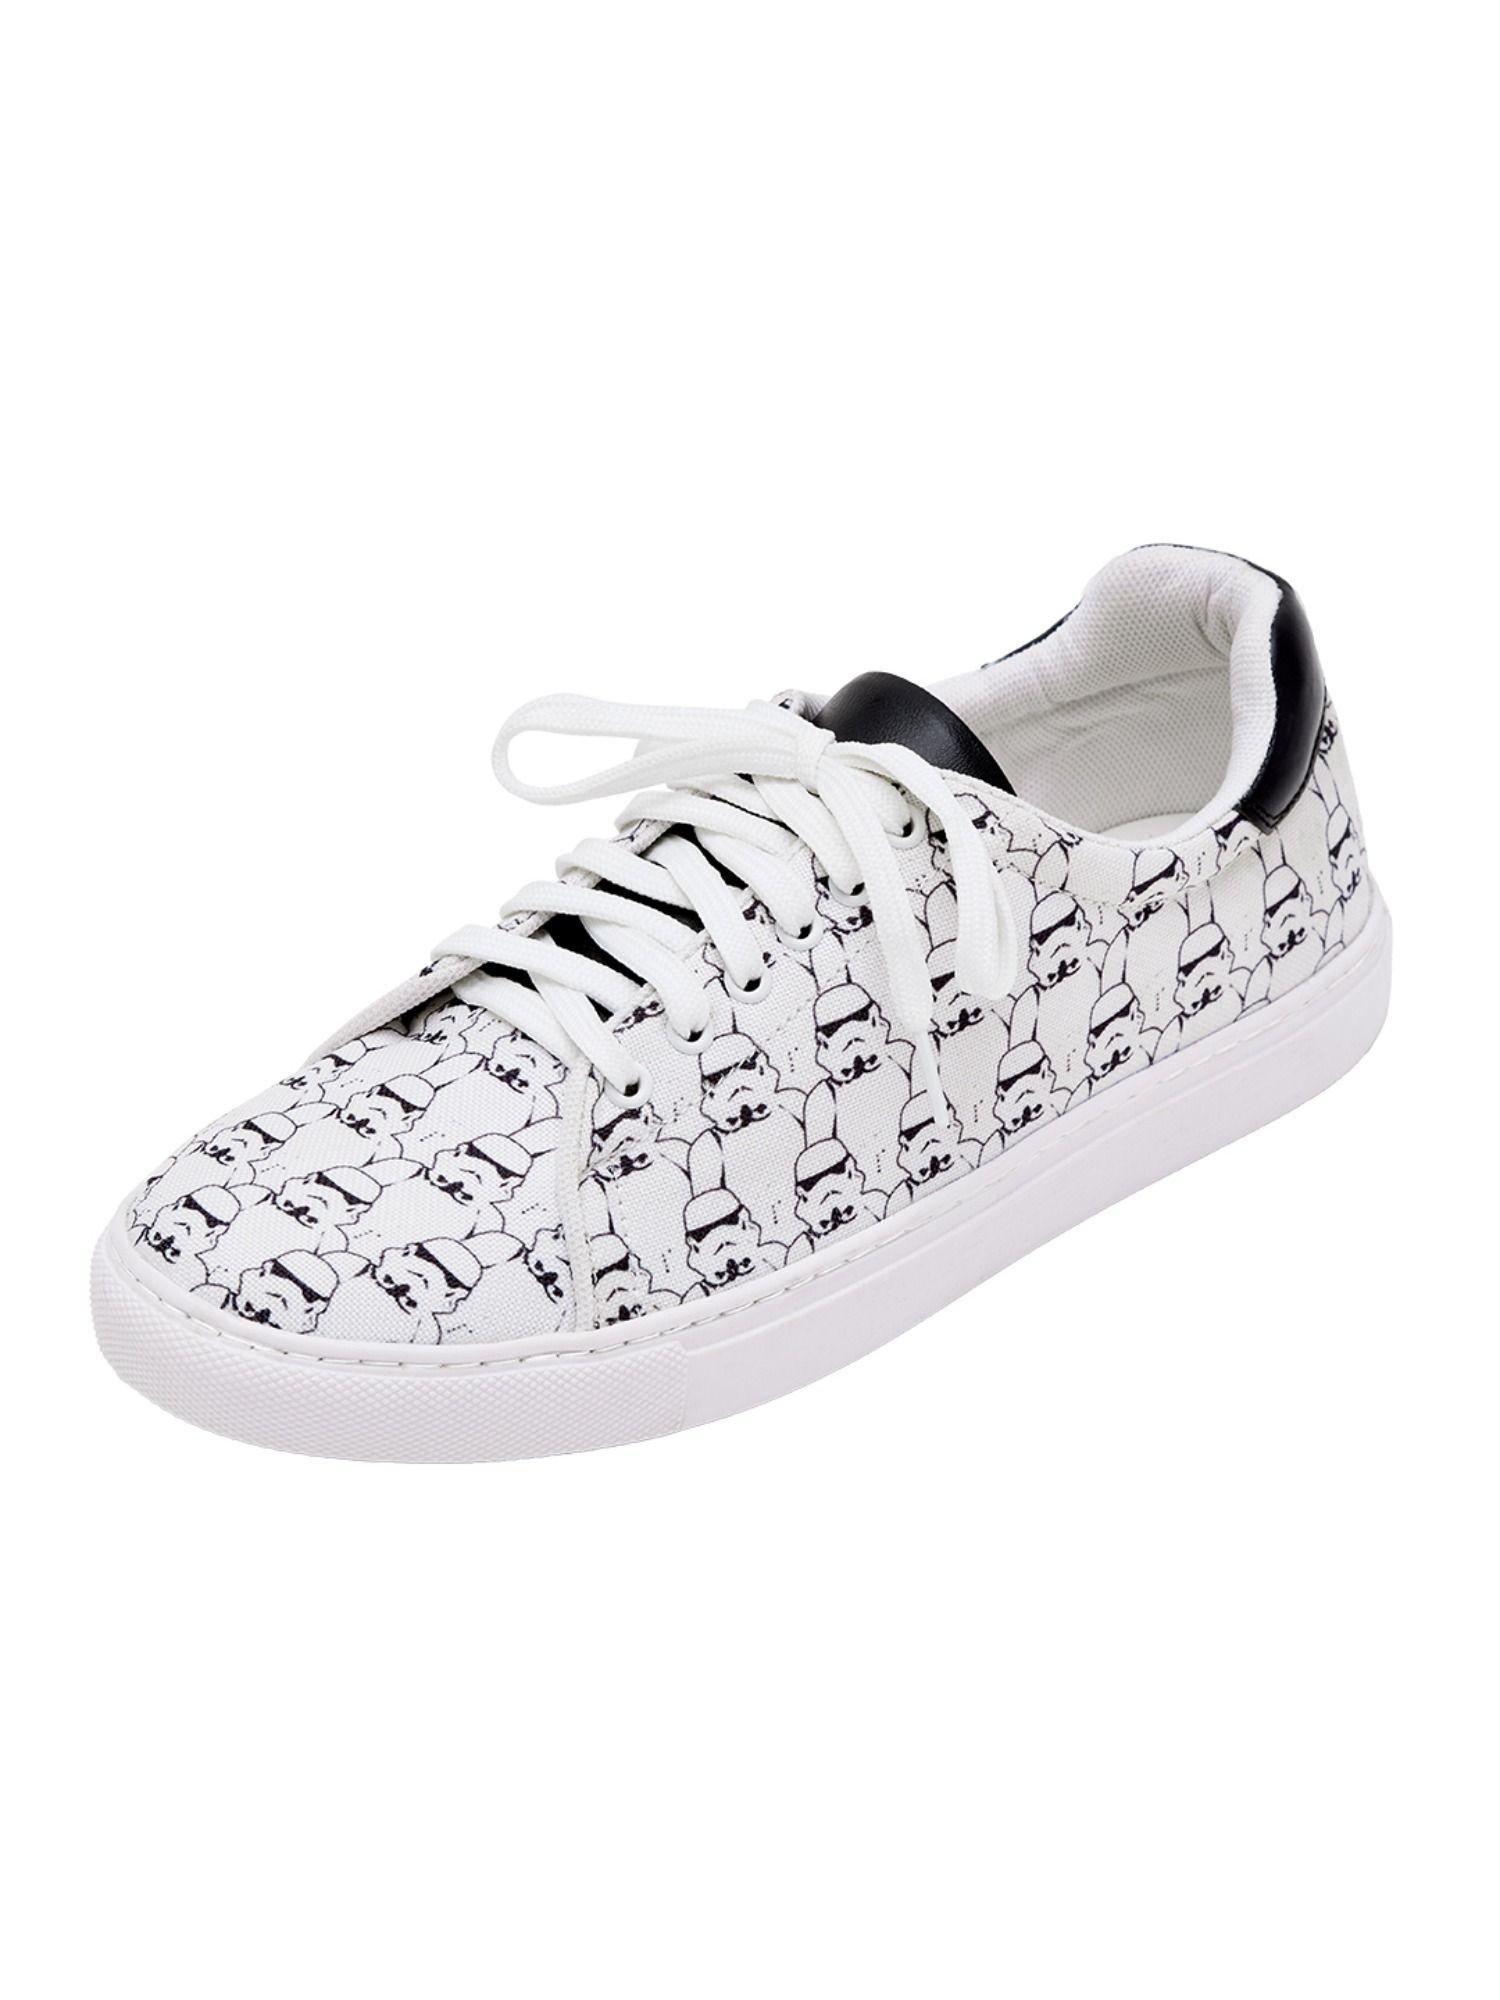 star wars: stormtroopers men lace up shoes white aop printed